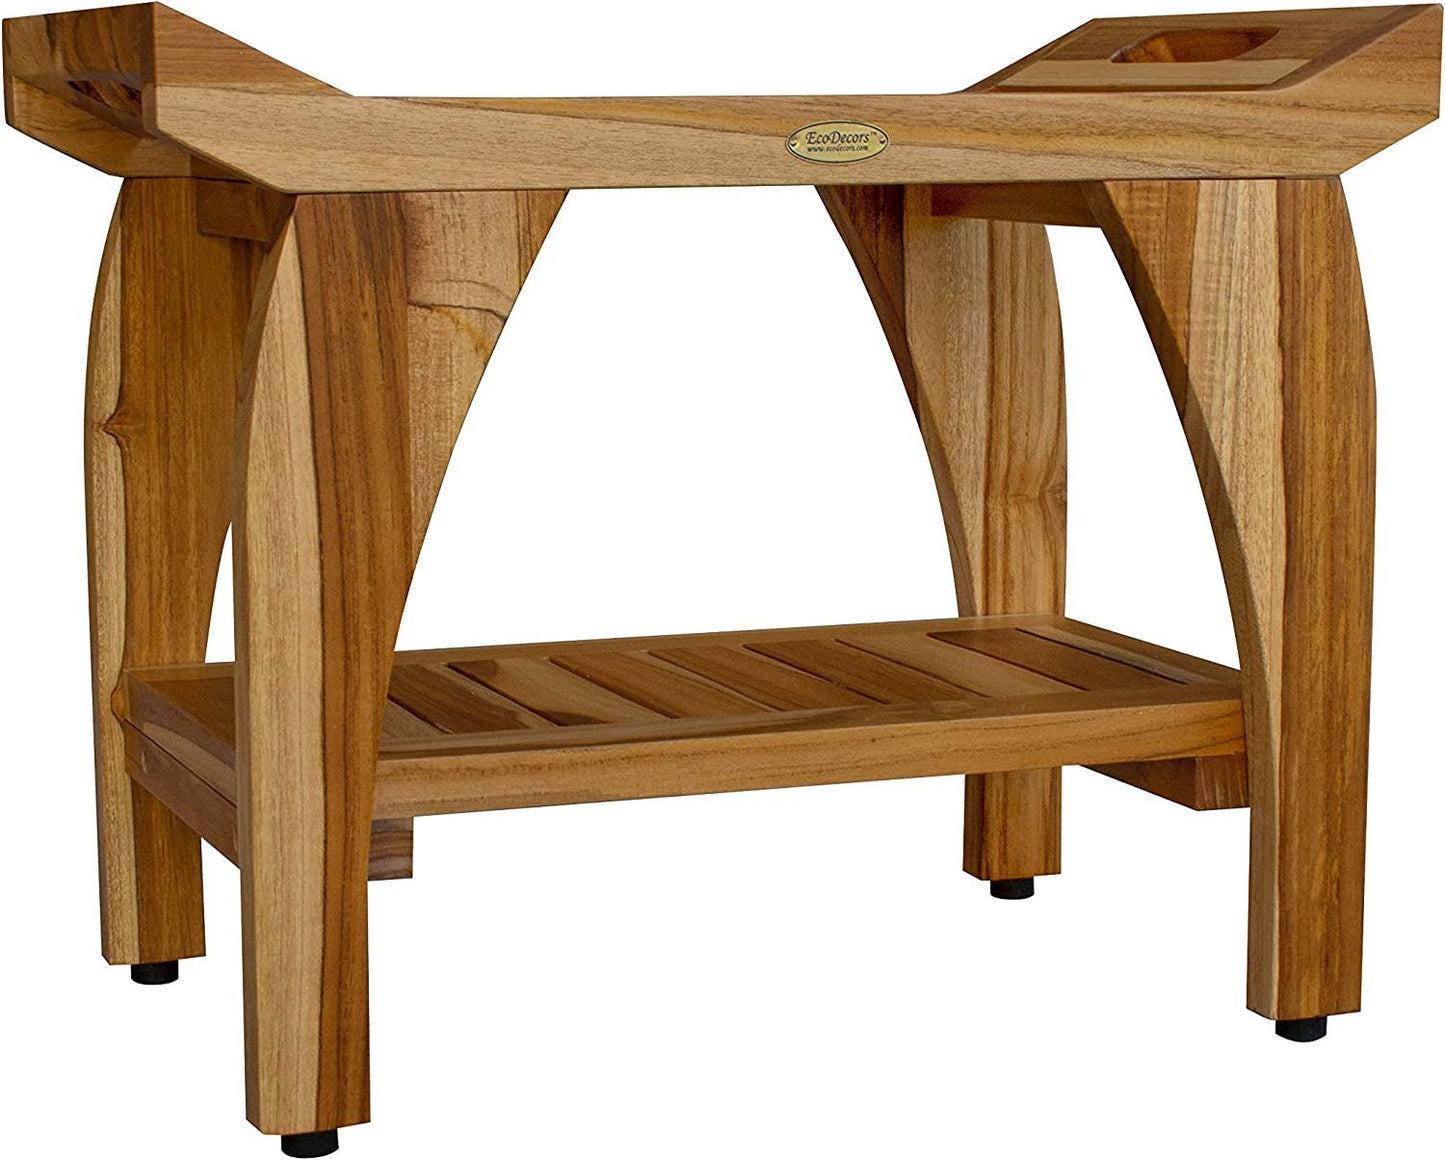 Earthy Teak Tranquility Shower Bench Natural Wood Shower Stool with Storage Shelf and Liftaide Arms for Indoors and Outdoors -24 Inches Length